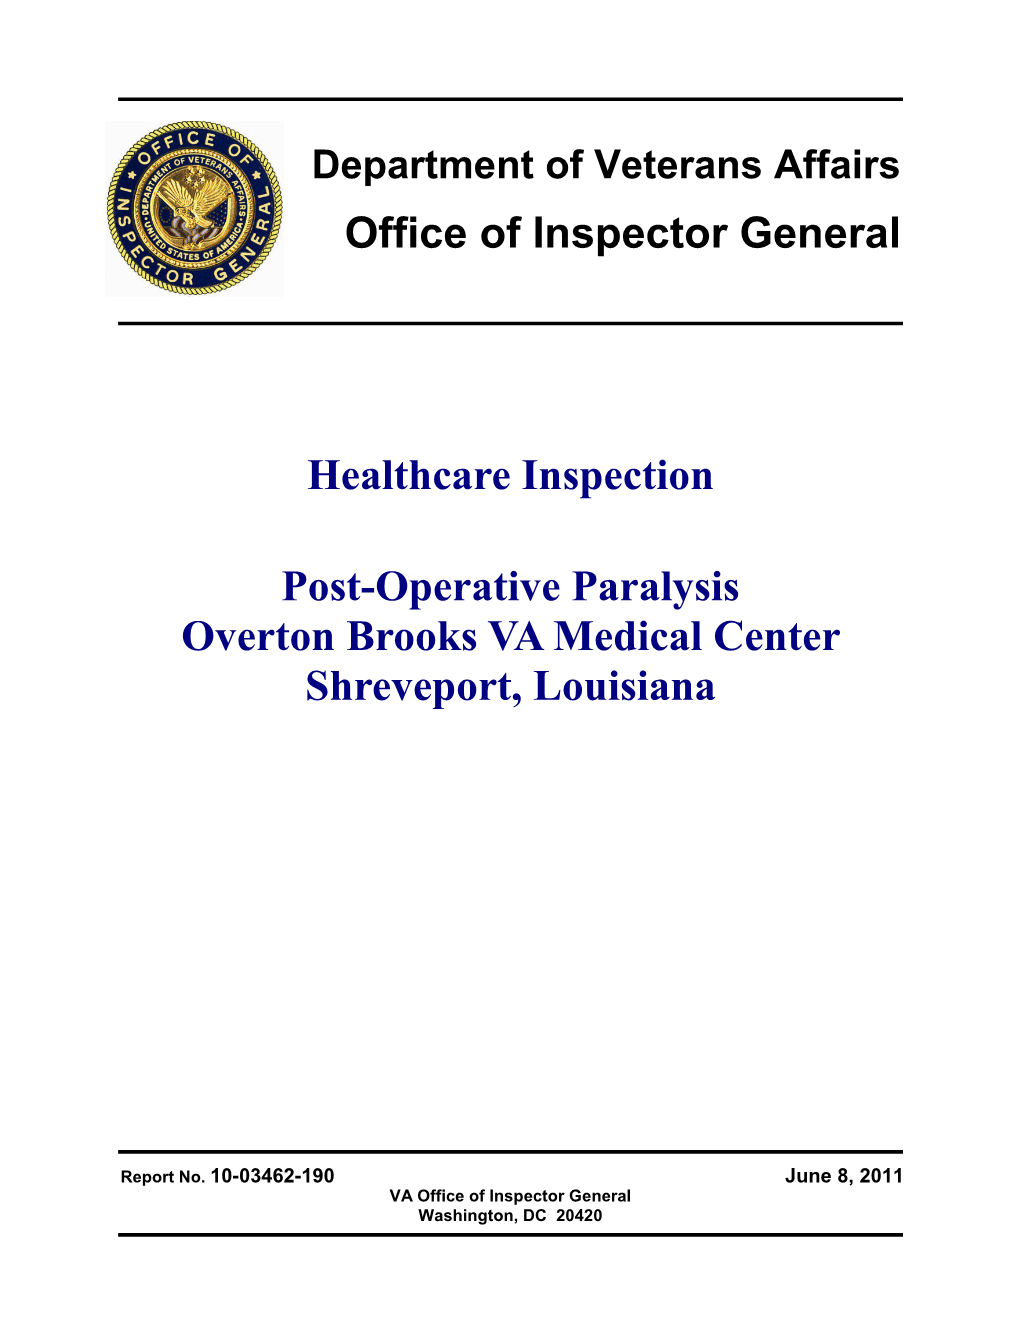 Department of Veterans Affairs Office of Inspector General Healthcare